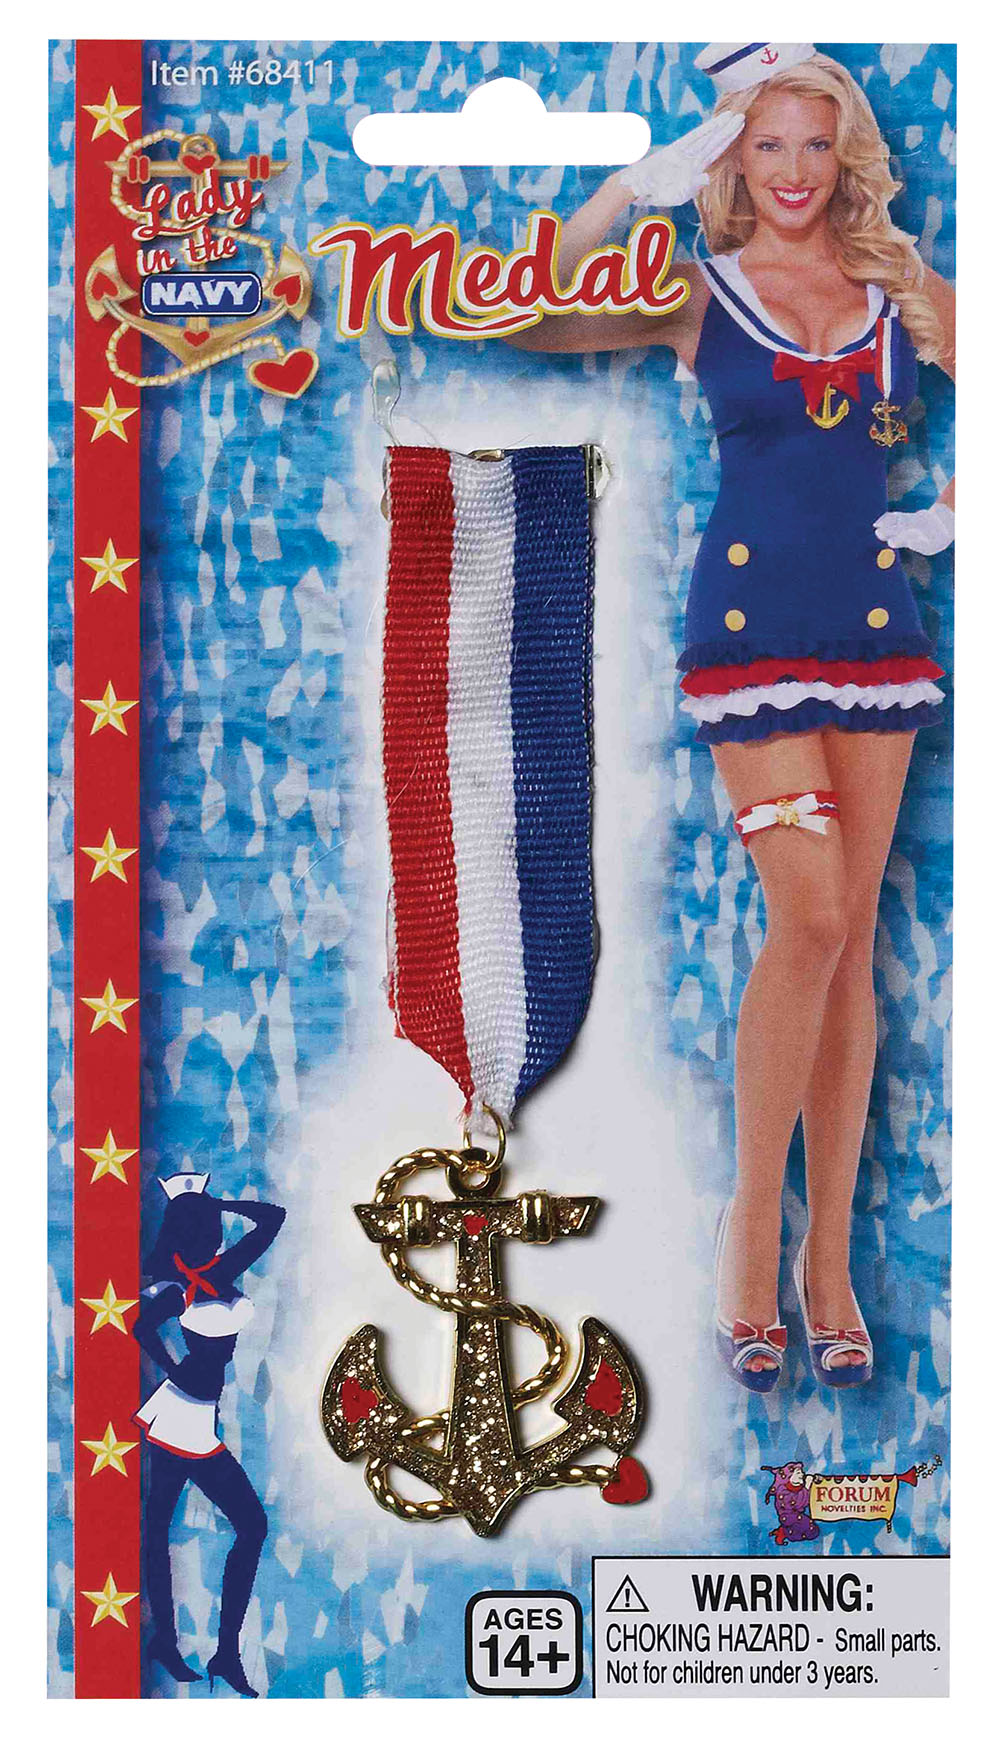 Lady in Navy Medal